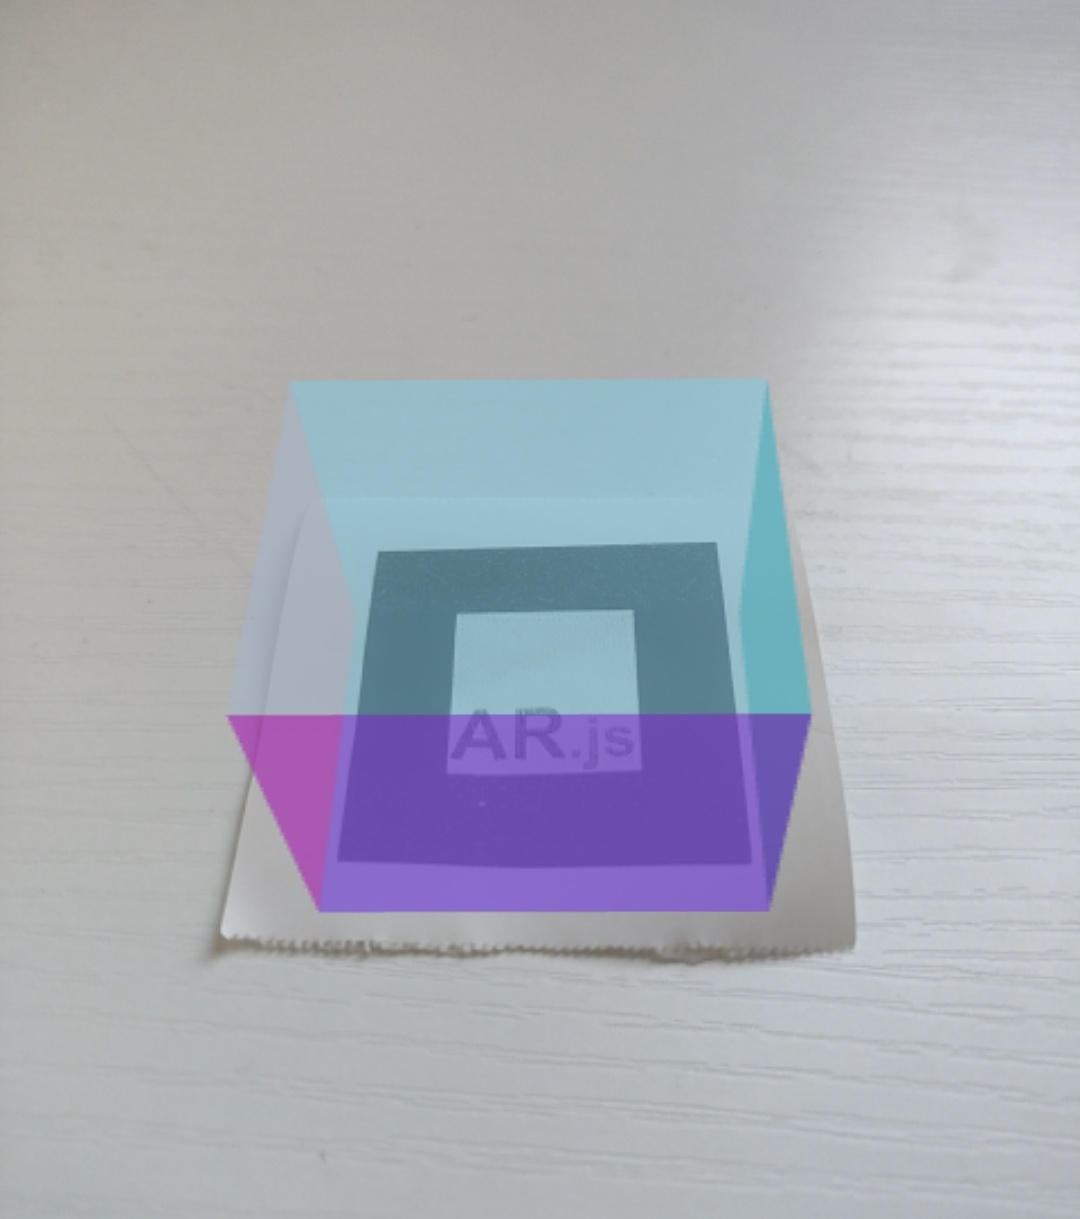 virtual cube on a marker